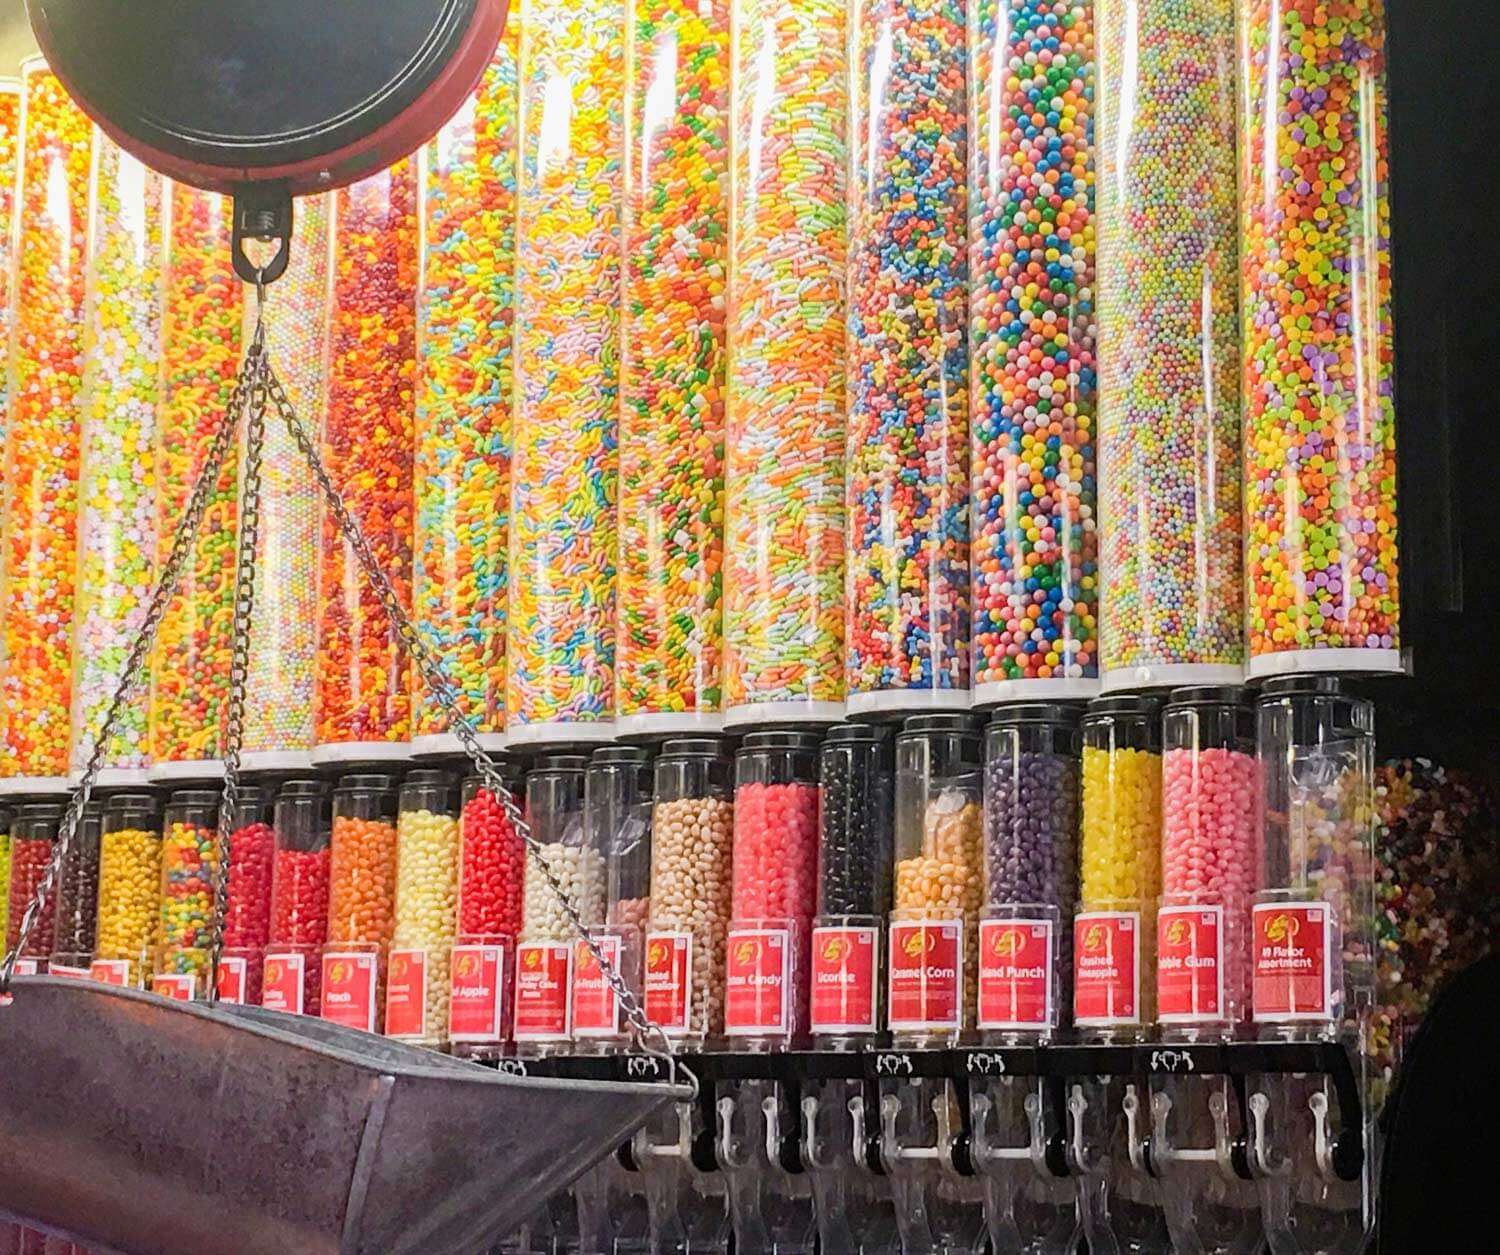 huge bins of hard candy at candy store